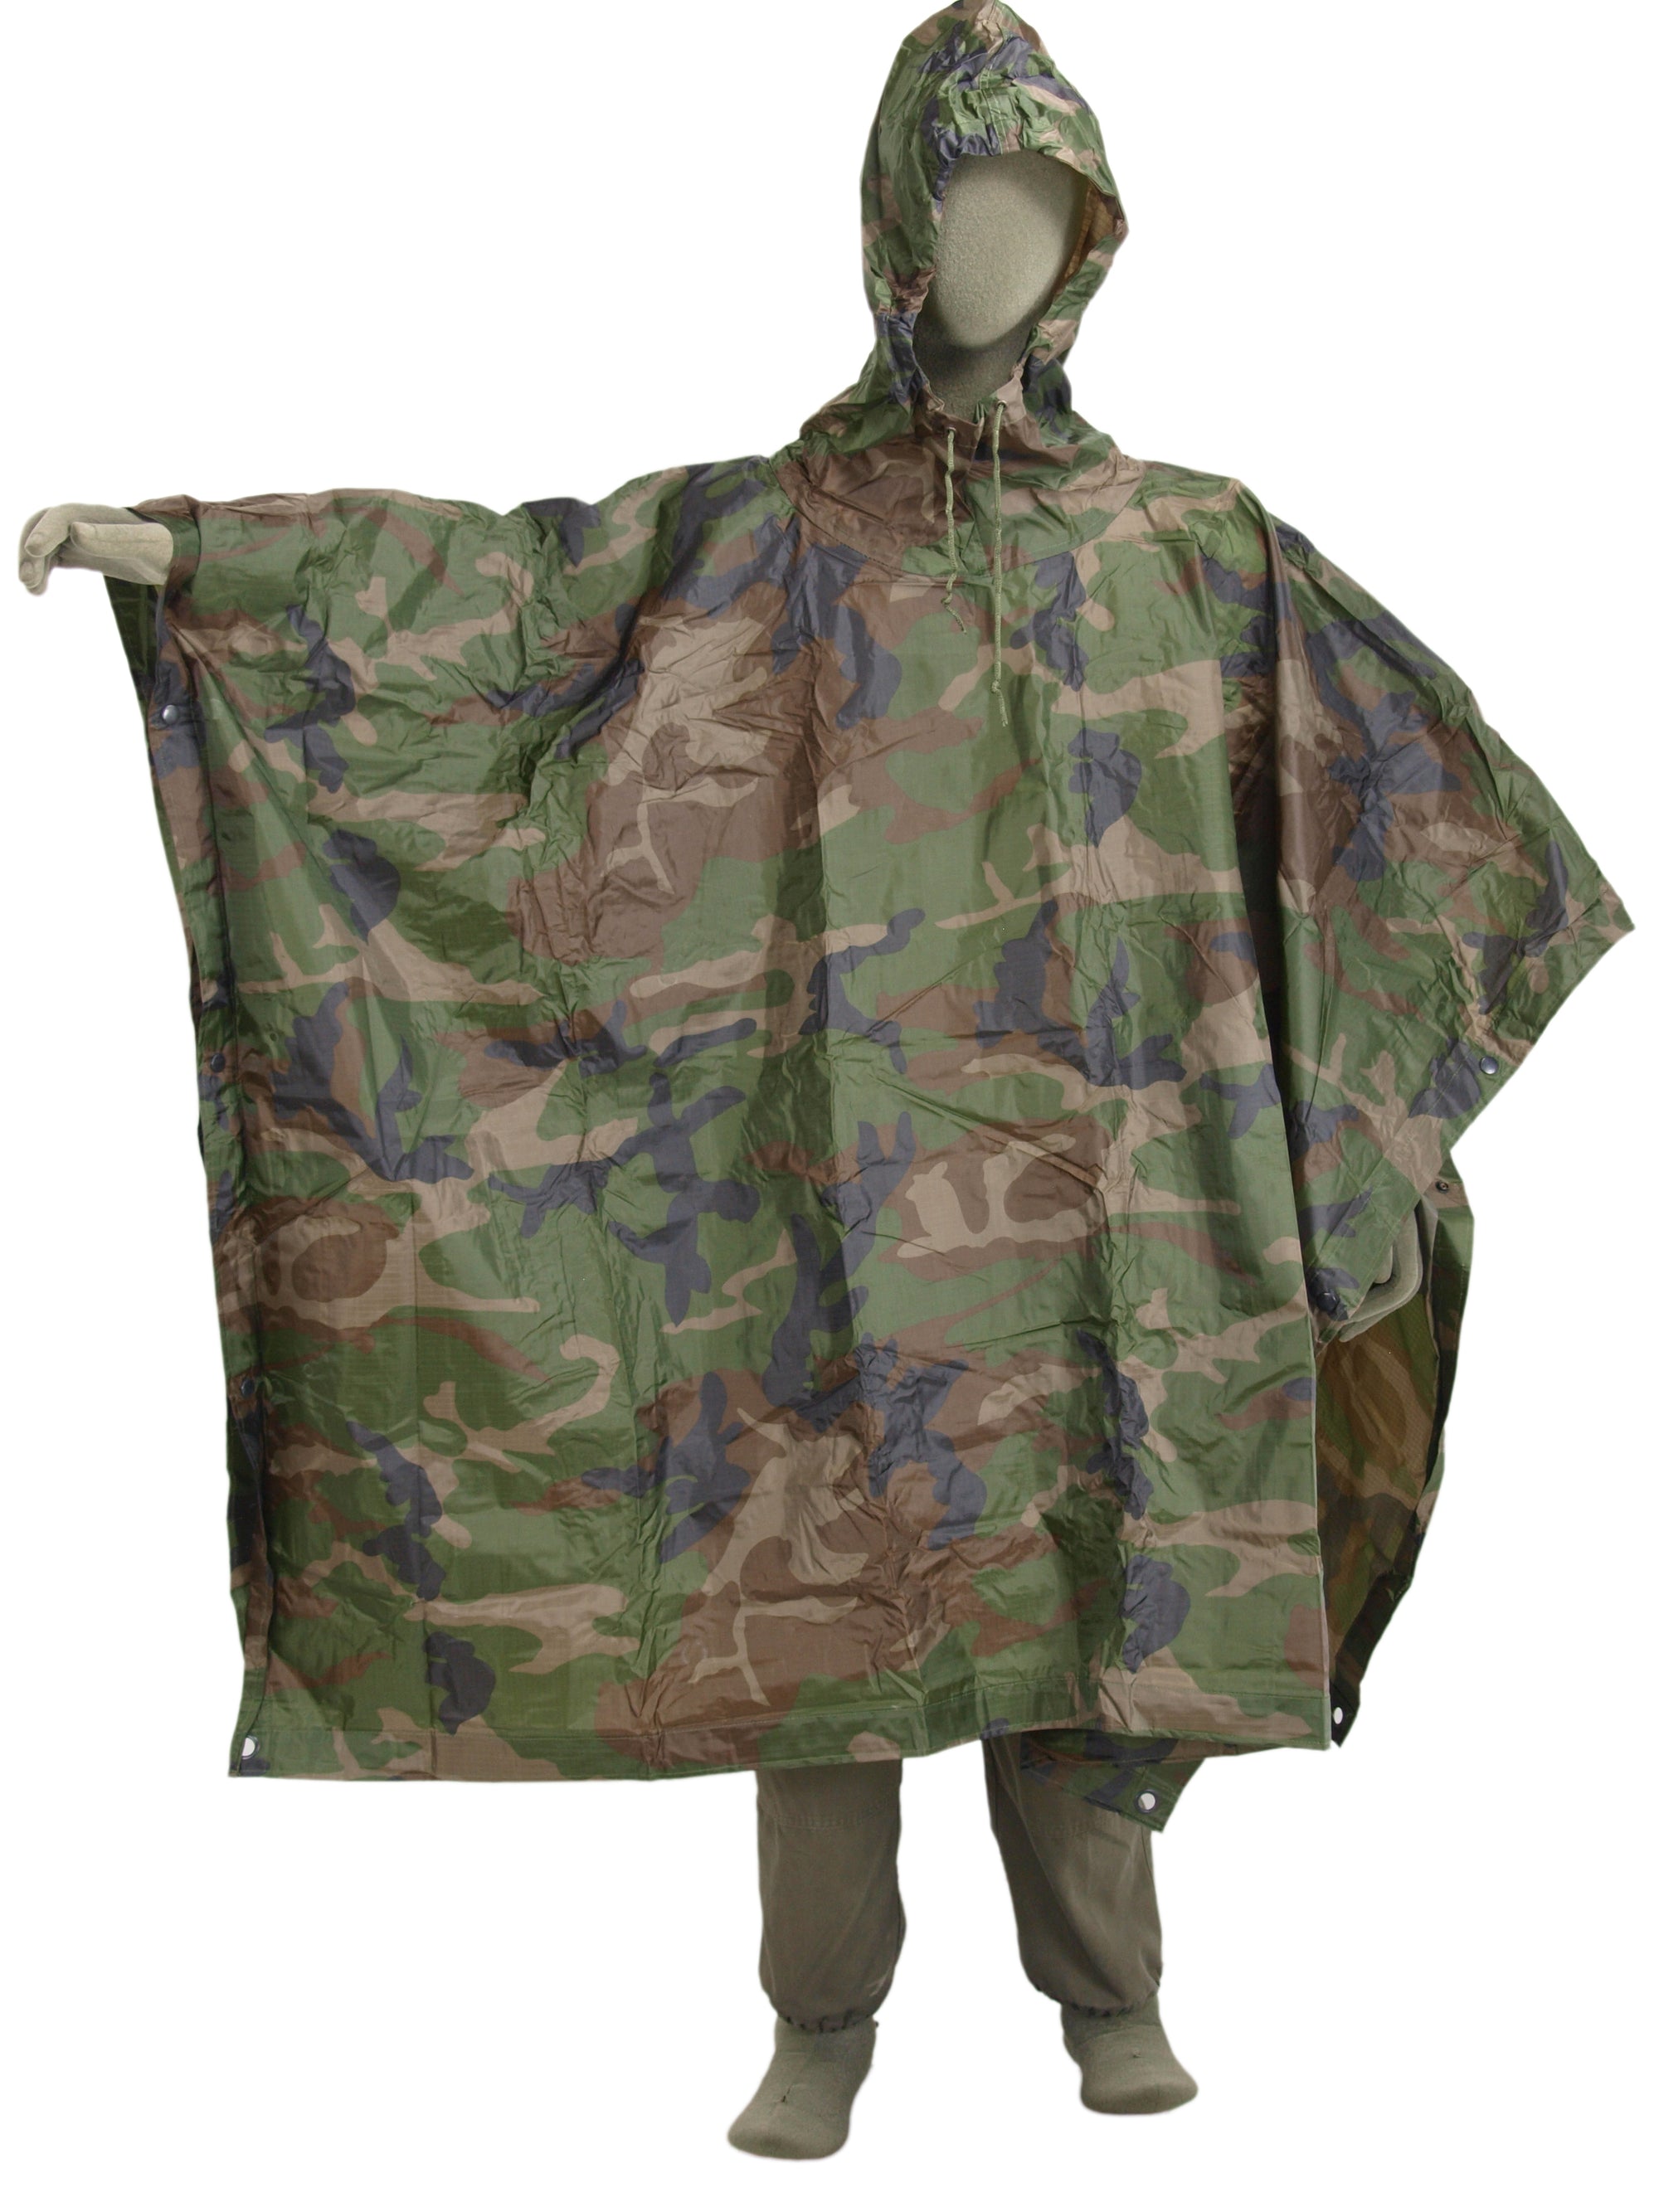 Foreign Legion African Jungle poncho - unissued in bag